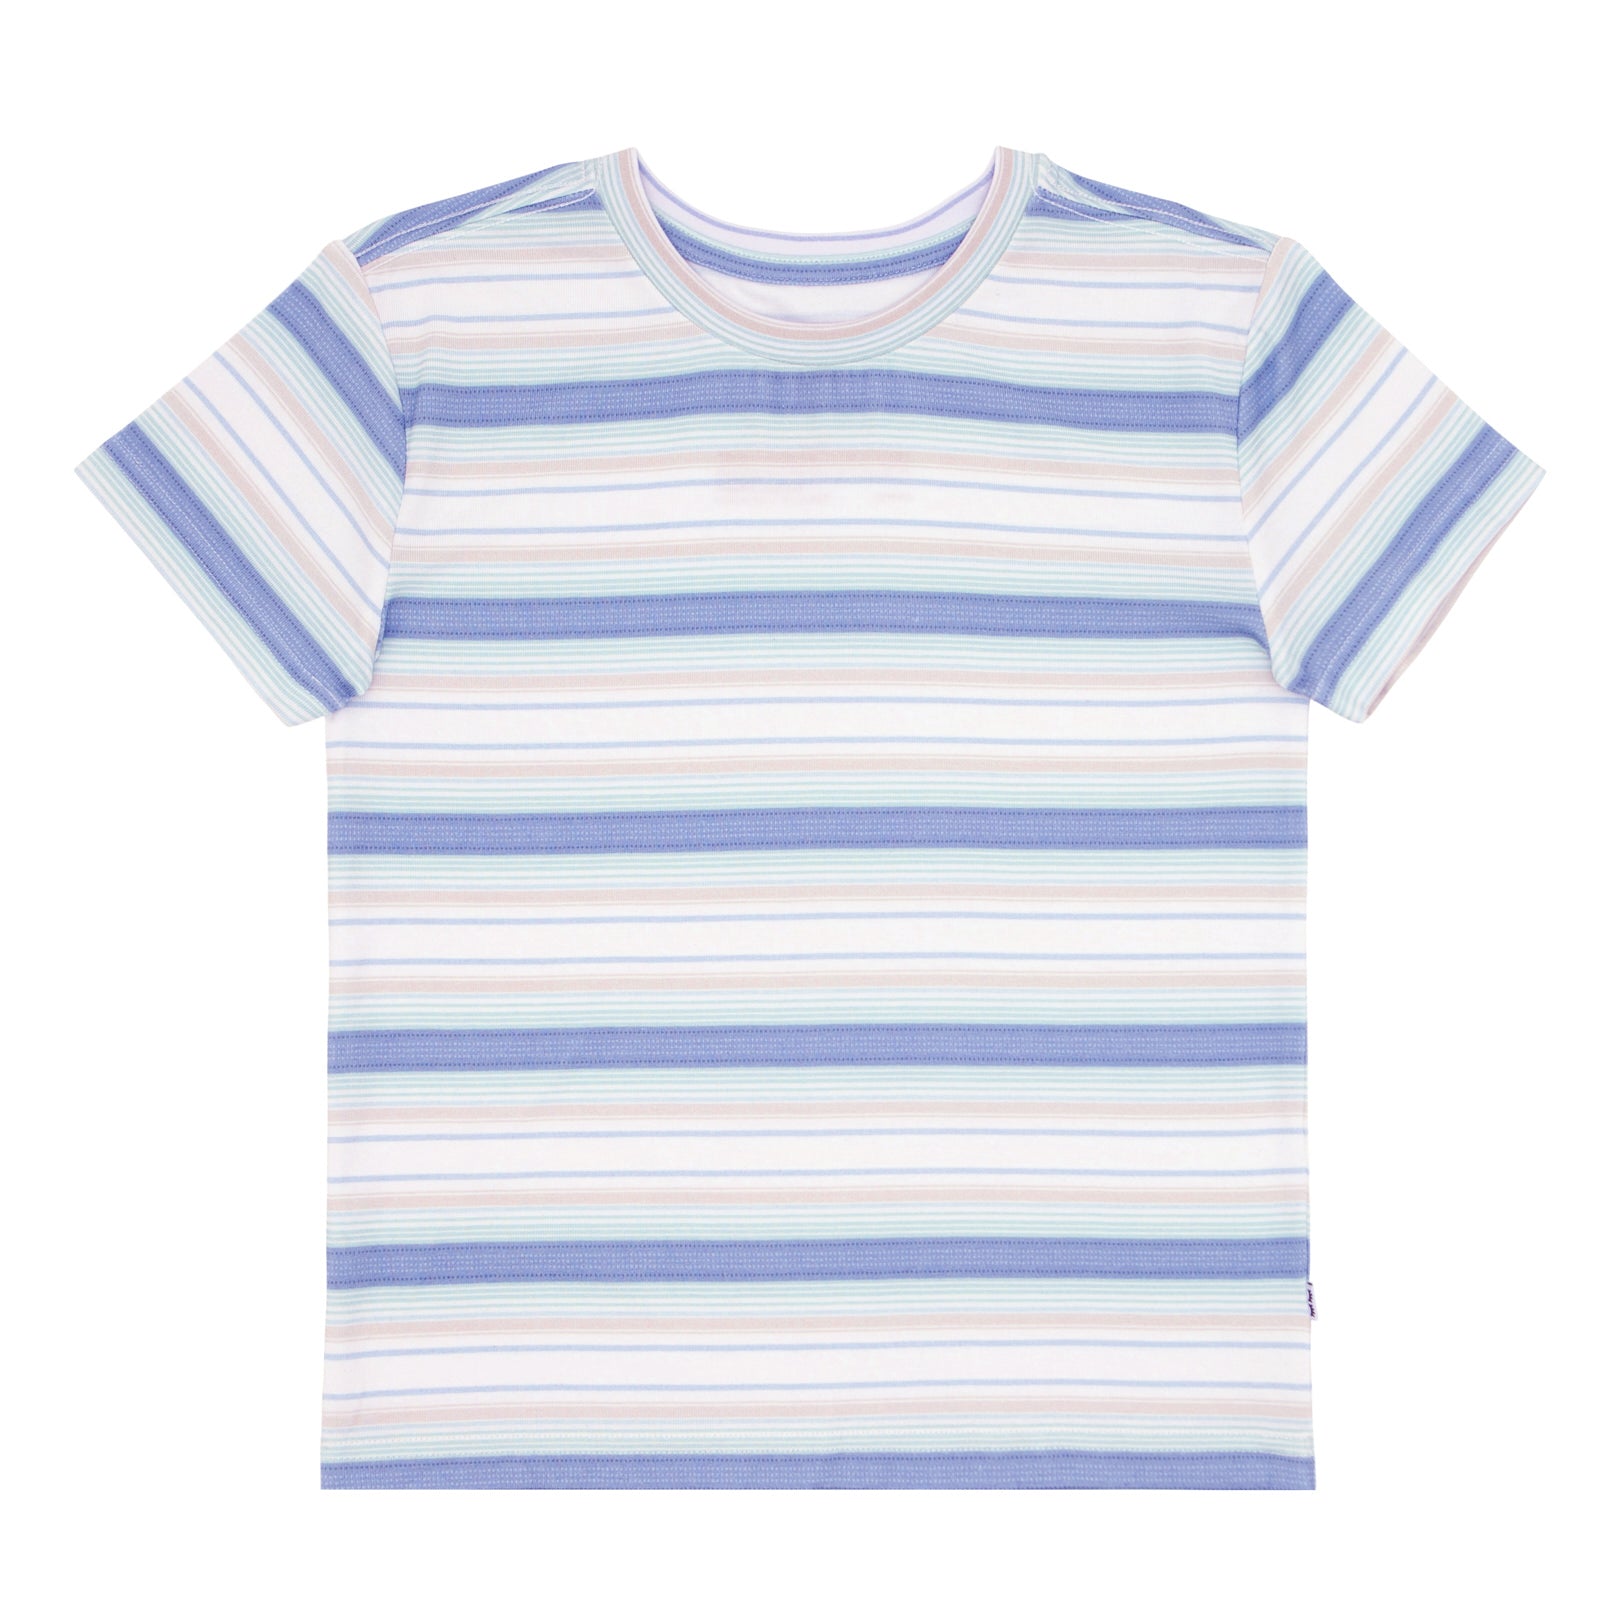 Flat lay image of a Surf Stripe relaxed tee